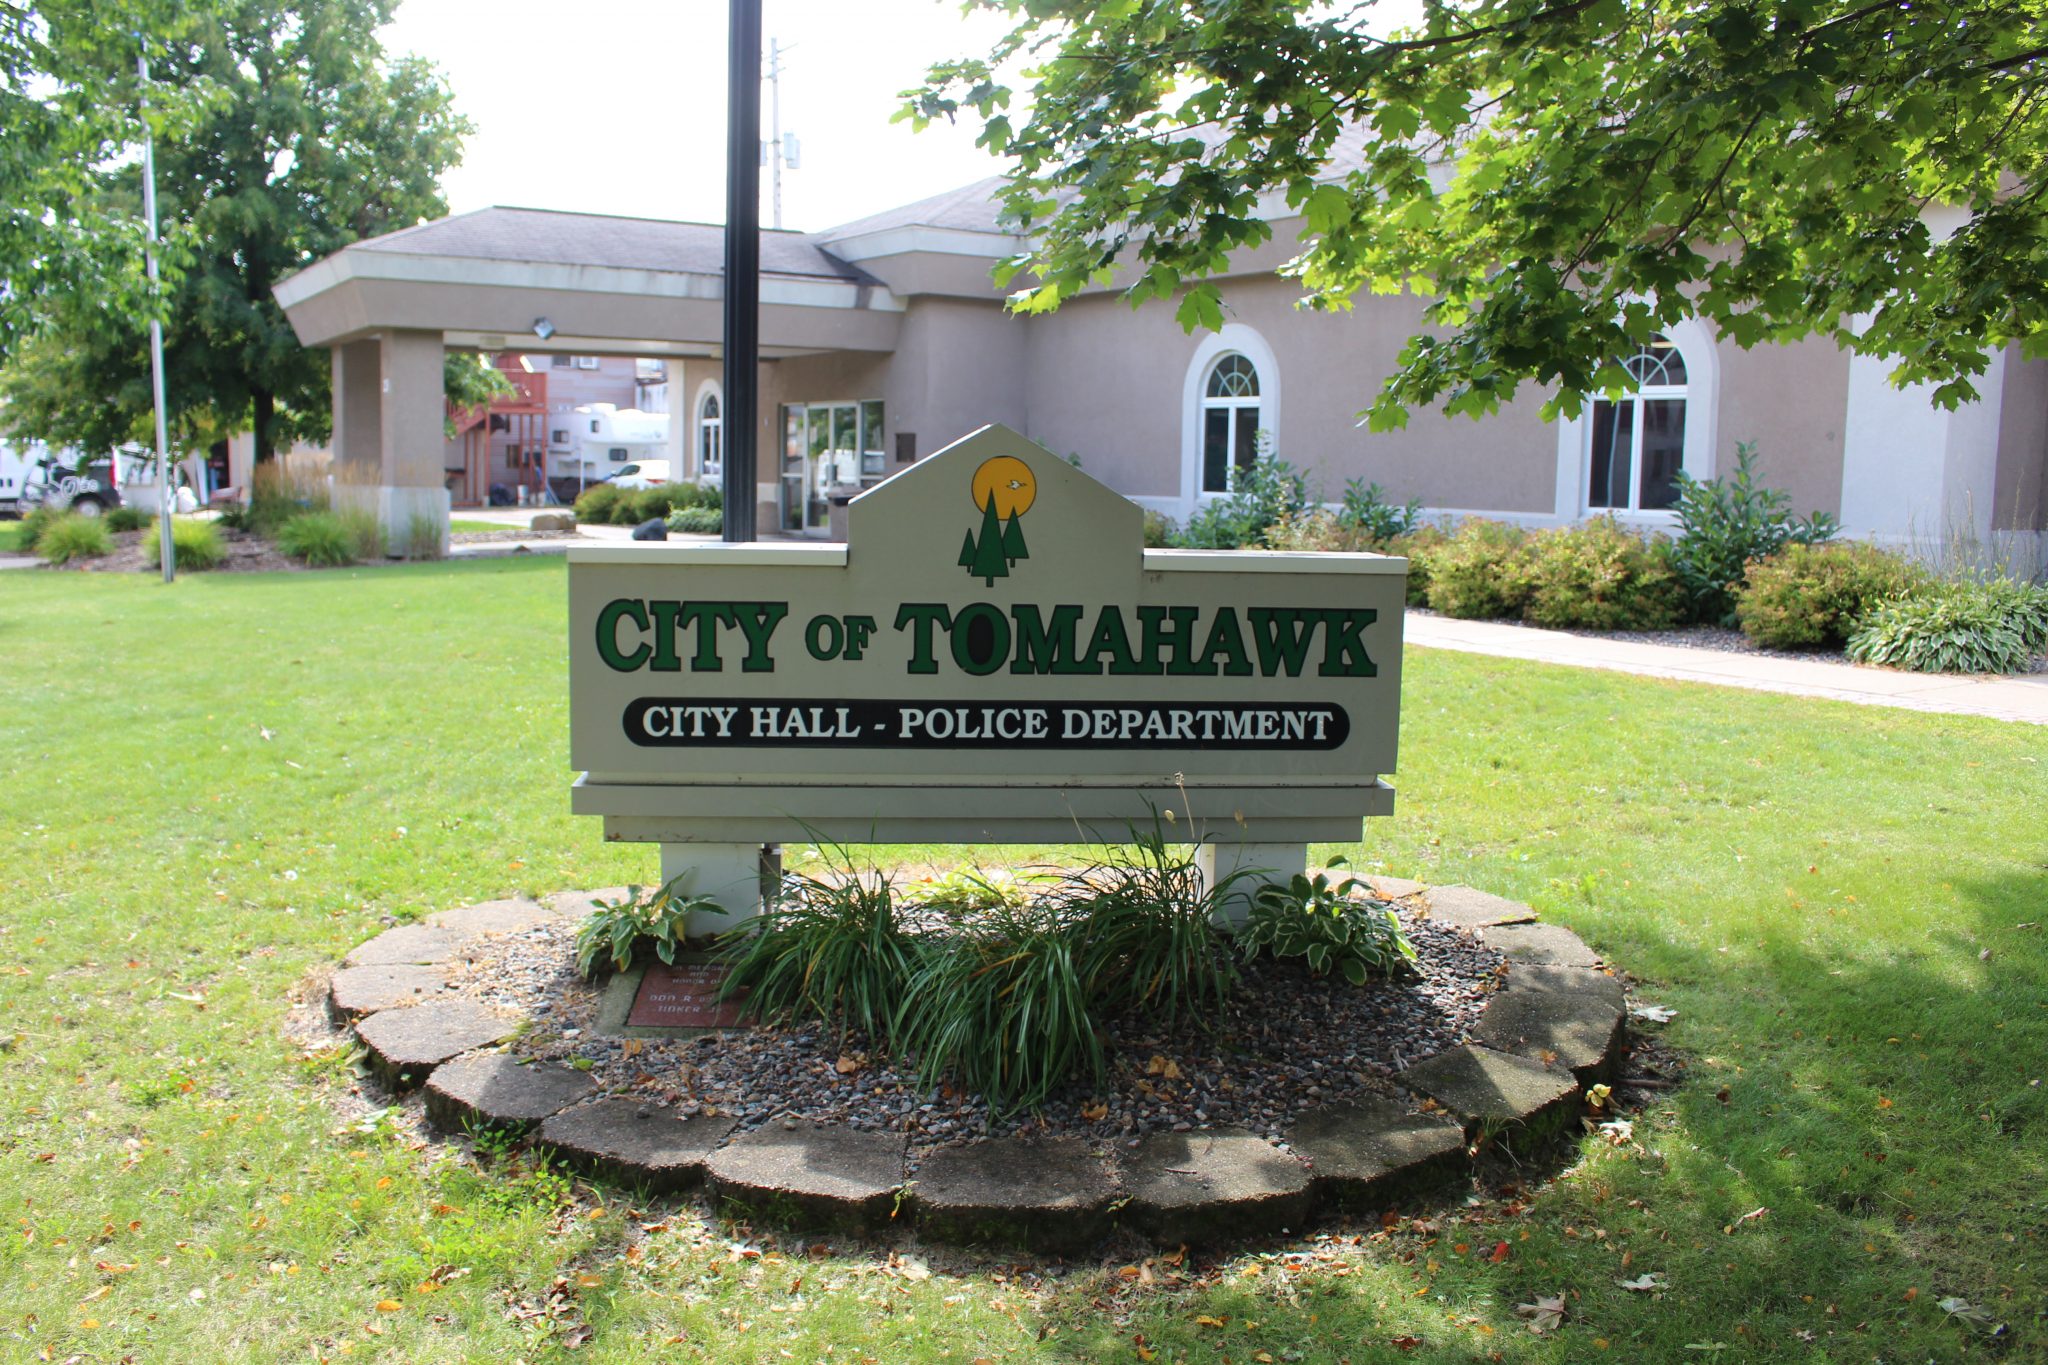 City of Tomahawk races: Mayor Taskay, Common Council incumbents reelected